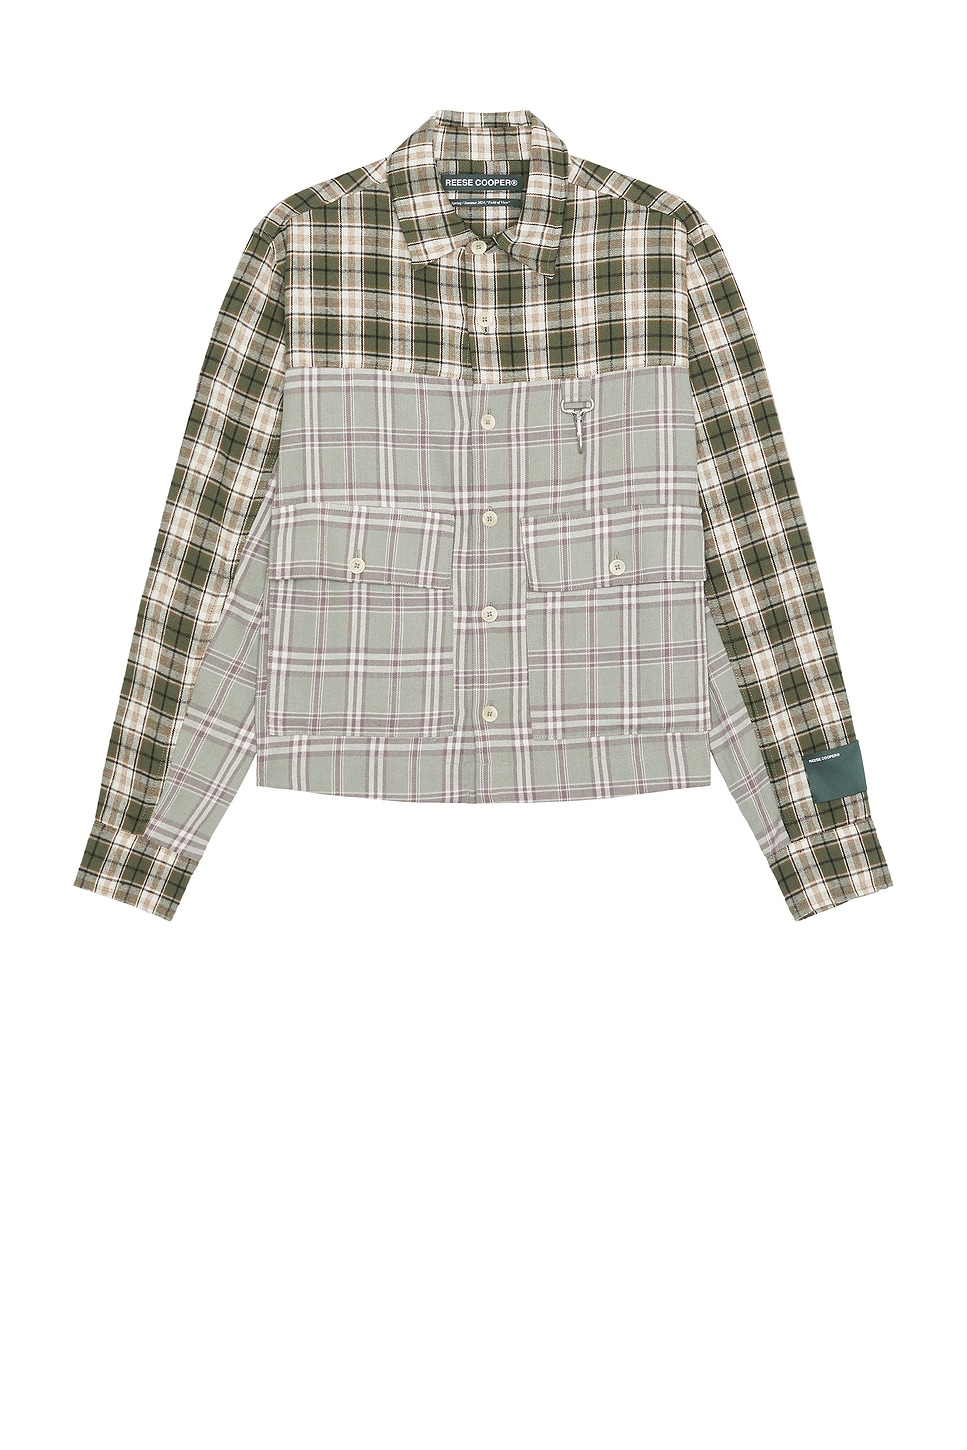 Image 1 of Reese Cooper Cropped Split Flannel Shirt in Green